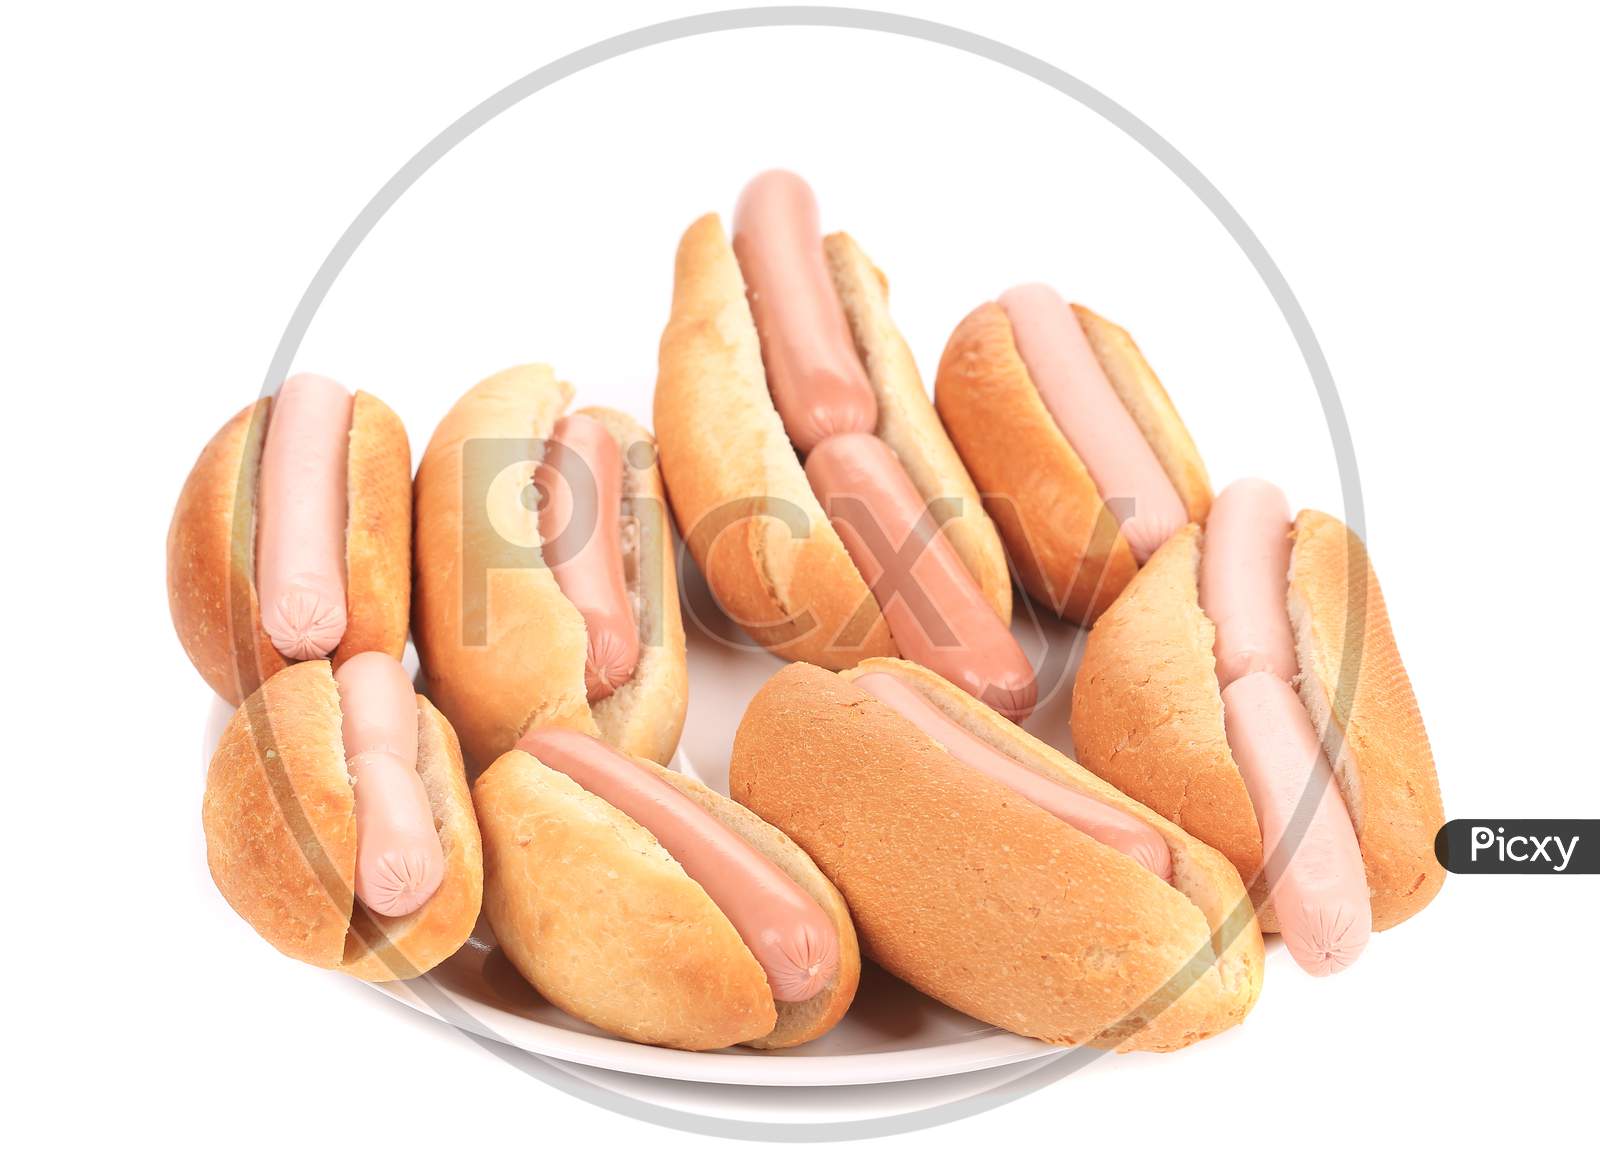 Bunch Of Hotdogs On Plate. Isolated On A White Background.